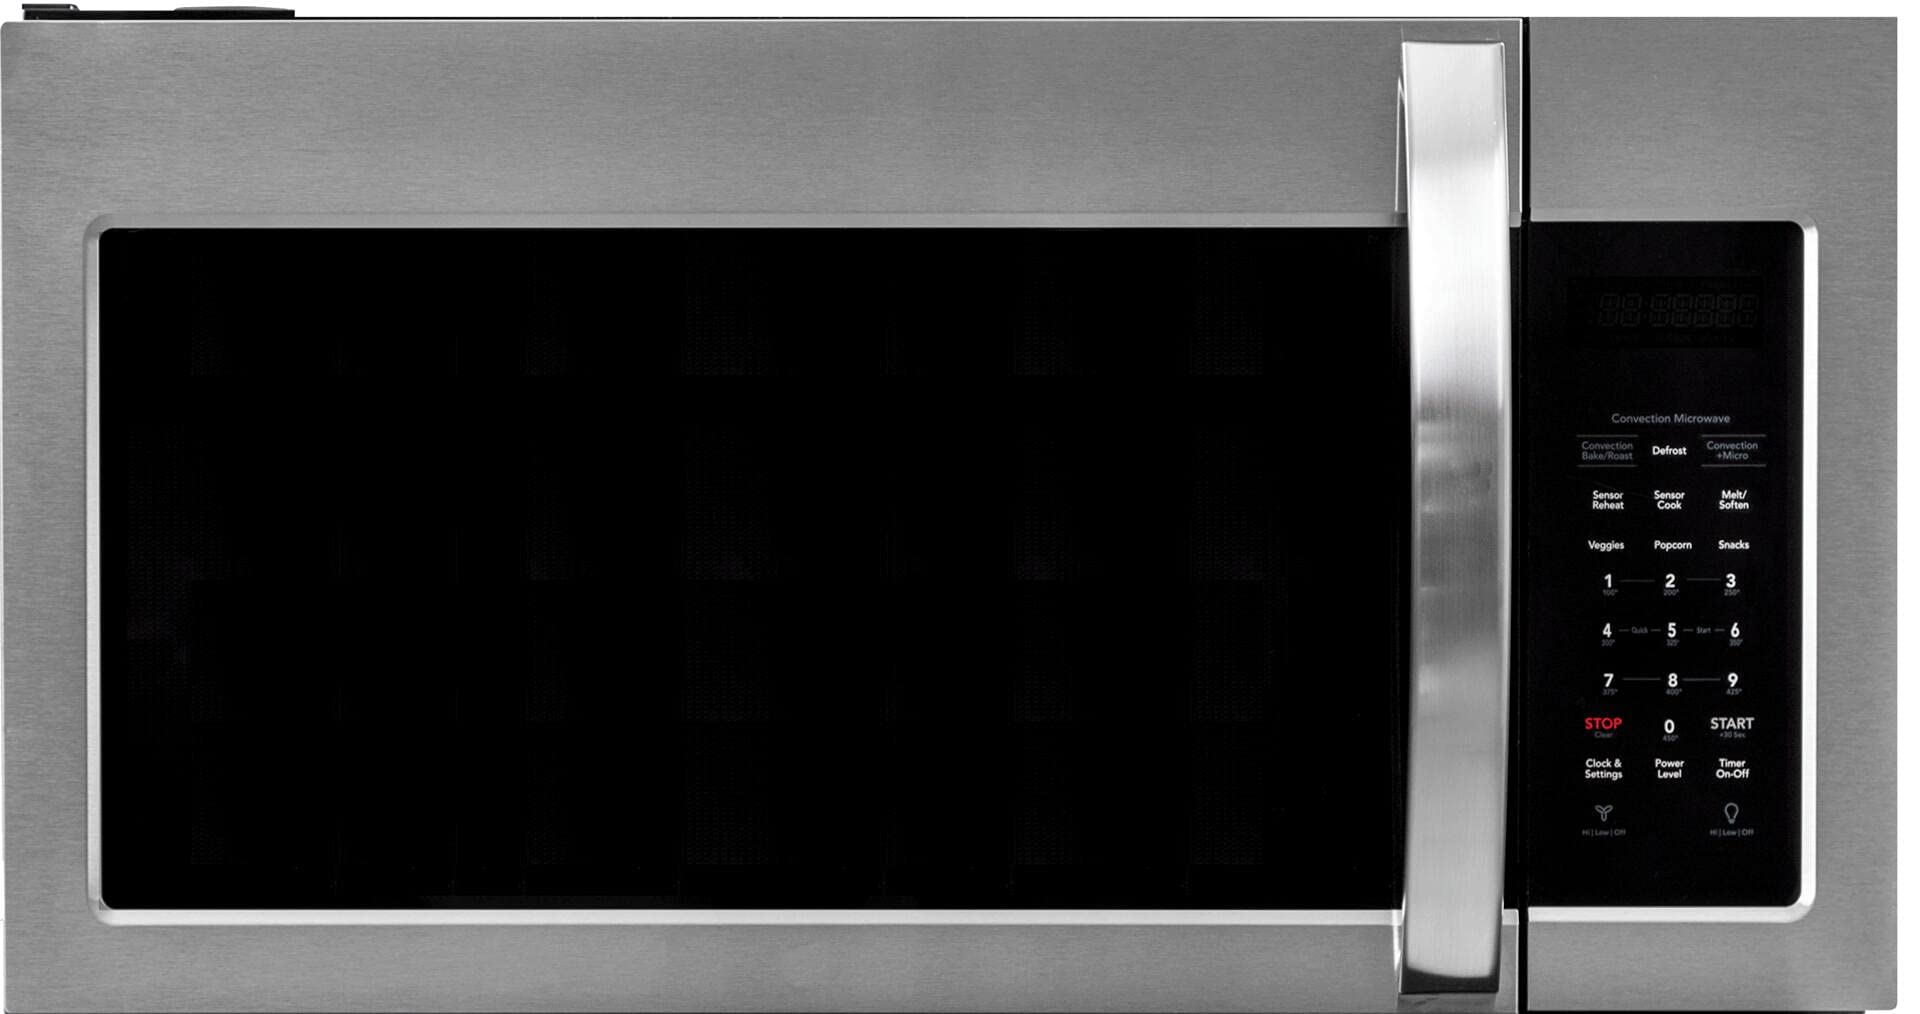 FORTÉ F3015MVC5SS Stainless Steel Over the Range Microwave Oven with Child Lock and Auto Cooker, Built in Microwave Saves Kitchen Countertop Space, 1000 Cooking Watt, 300 CFM Vent Fan, 10 Power Levels